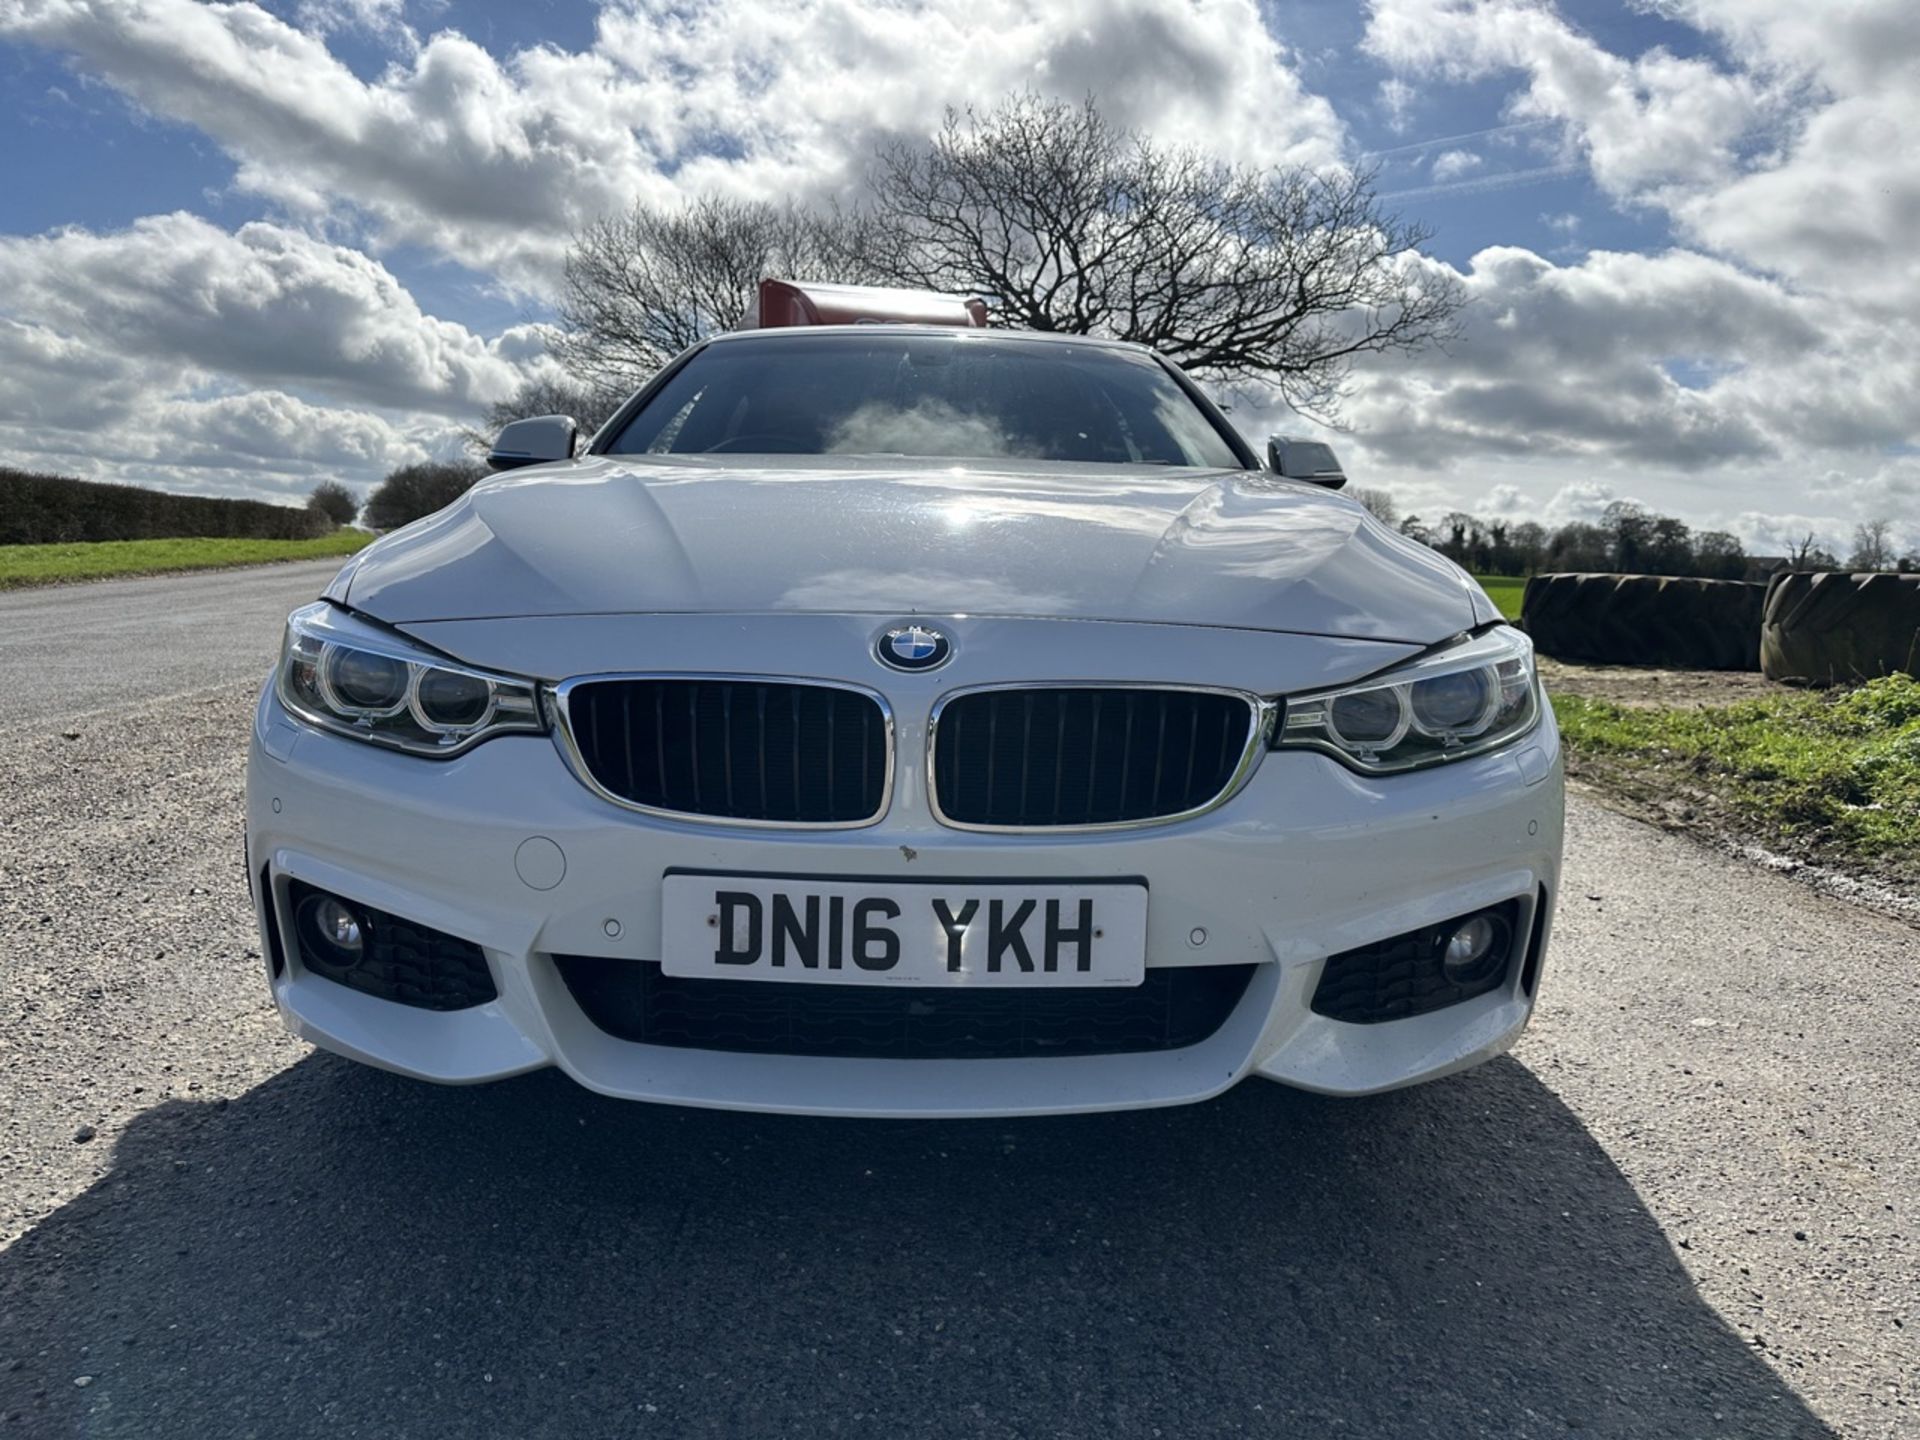 BMW 4 SERIES 420i M Sport 5dr [Professional Media] Manual - Petrol - 2.0 - Coupe- 54k miles - 2016 - Image 6 of 13